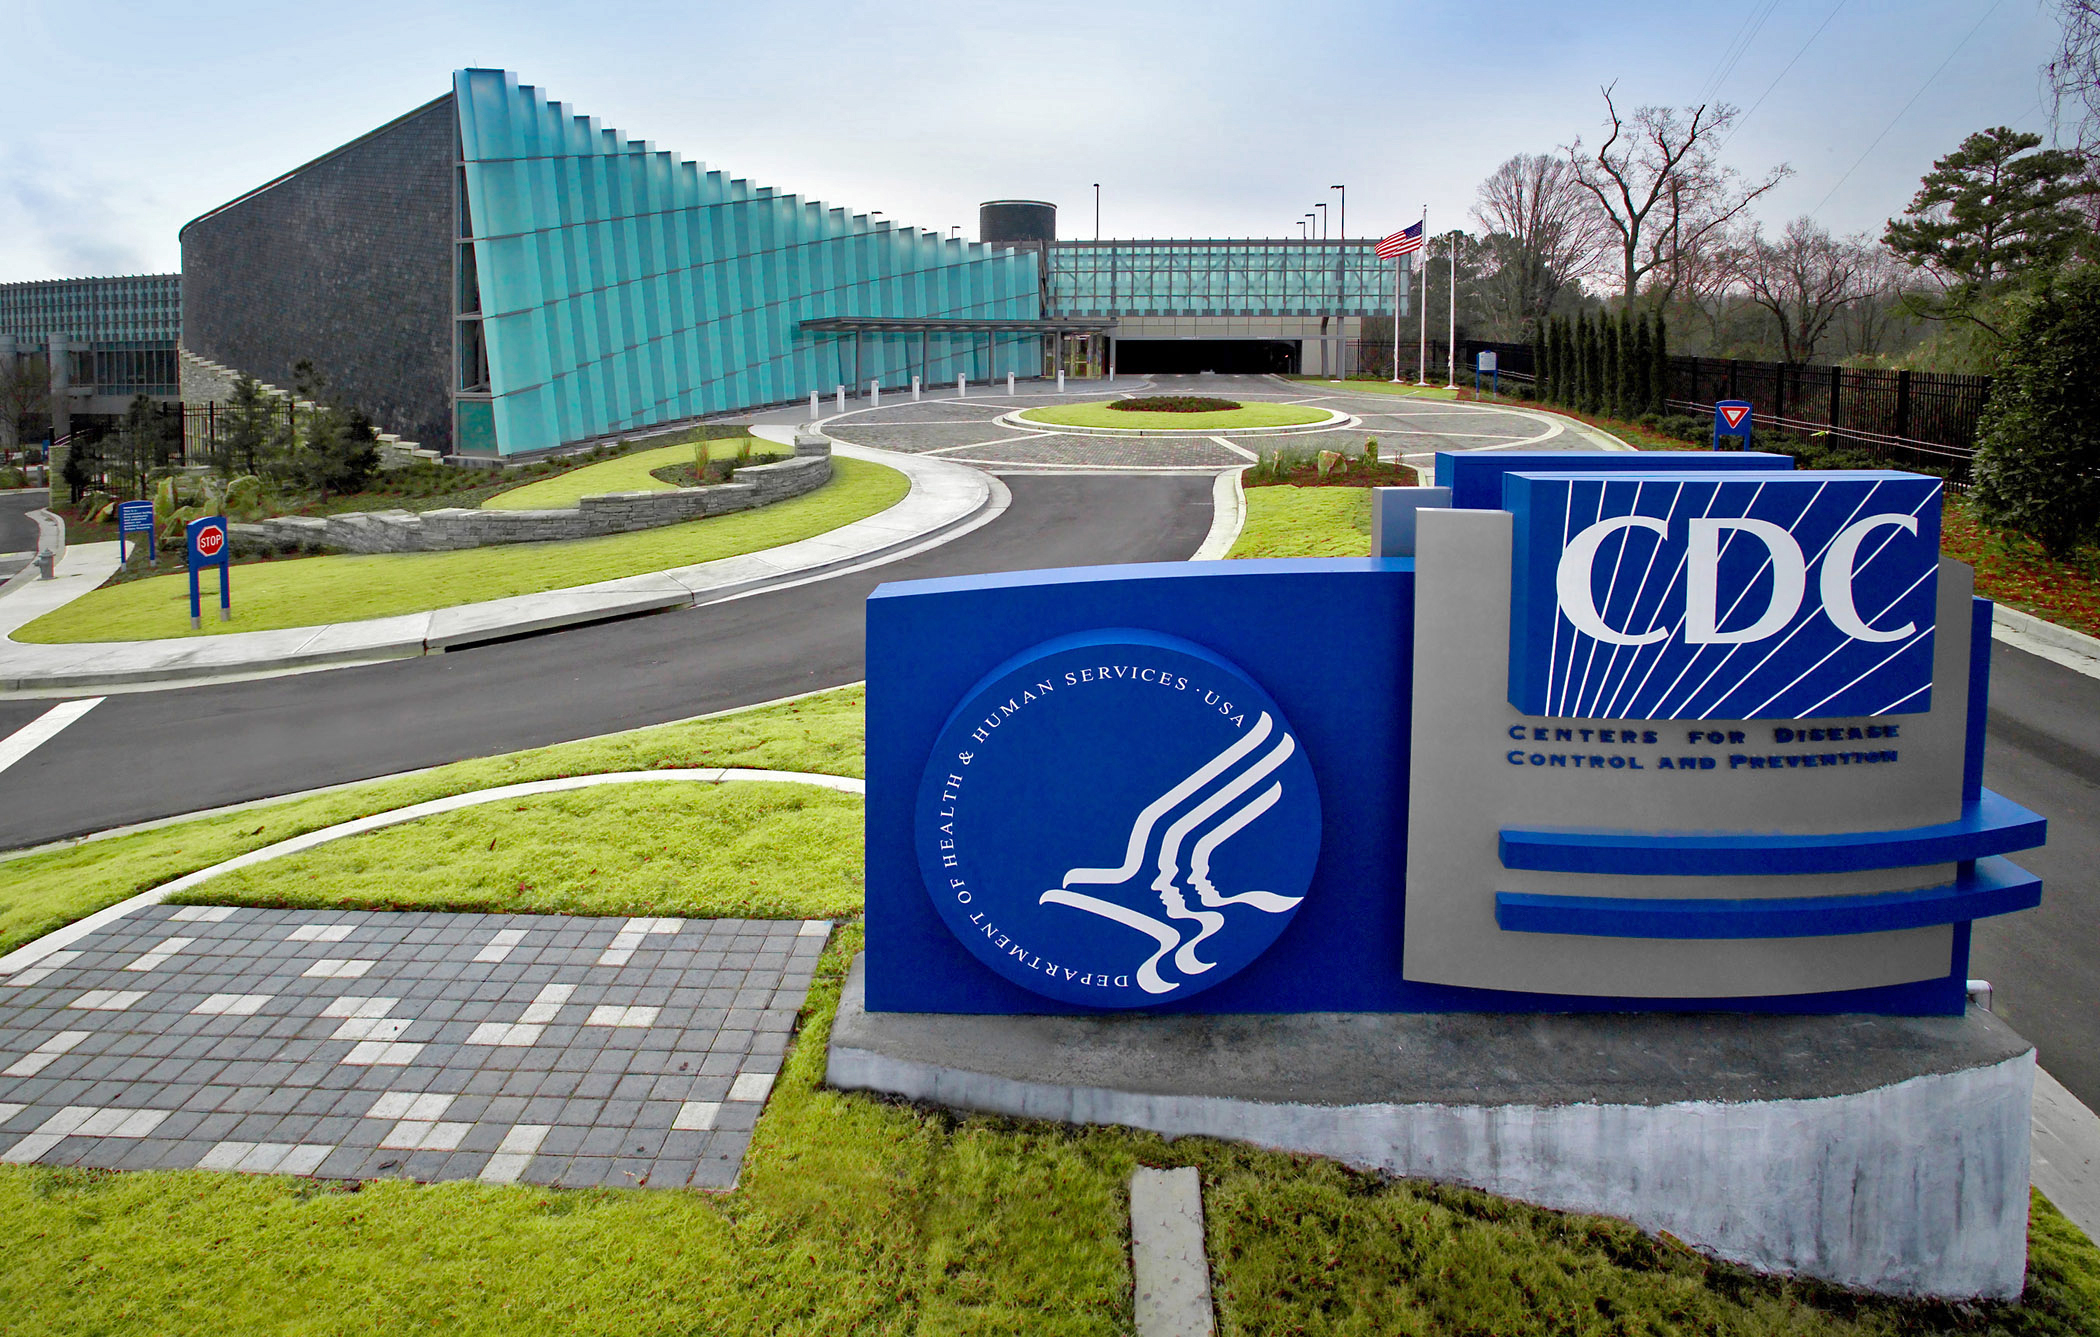 PHOTO: The Centers for Disease Control's Tom Harkin Global Communications Center is pictured in Atlanta in this undated image.